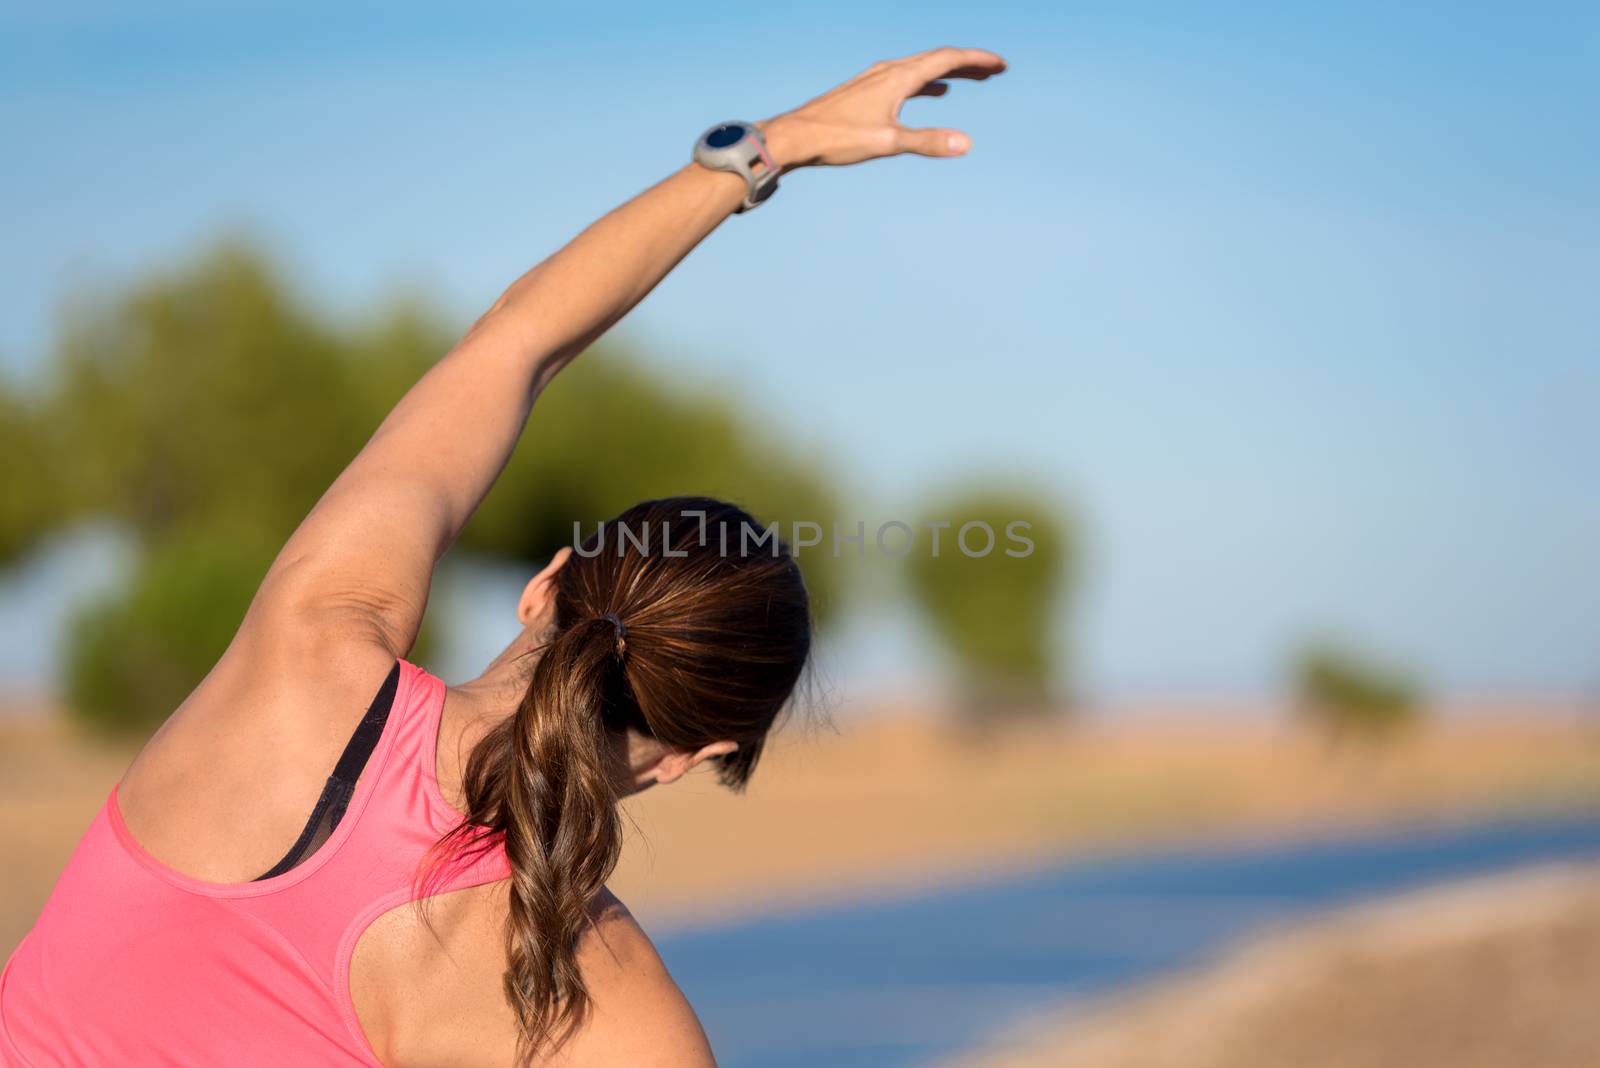 woman doing stretching exercise for back, sport background.